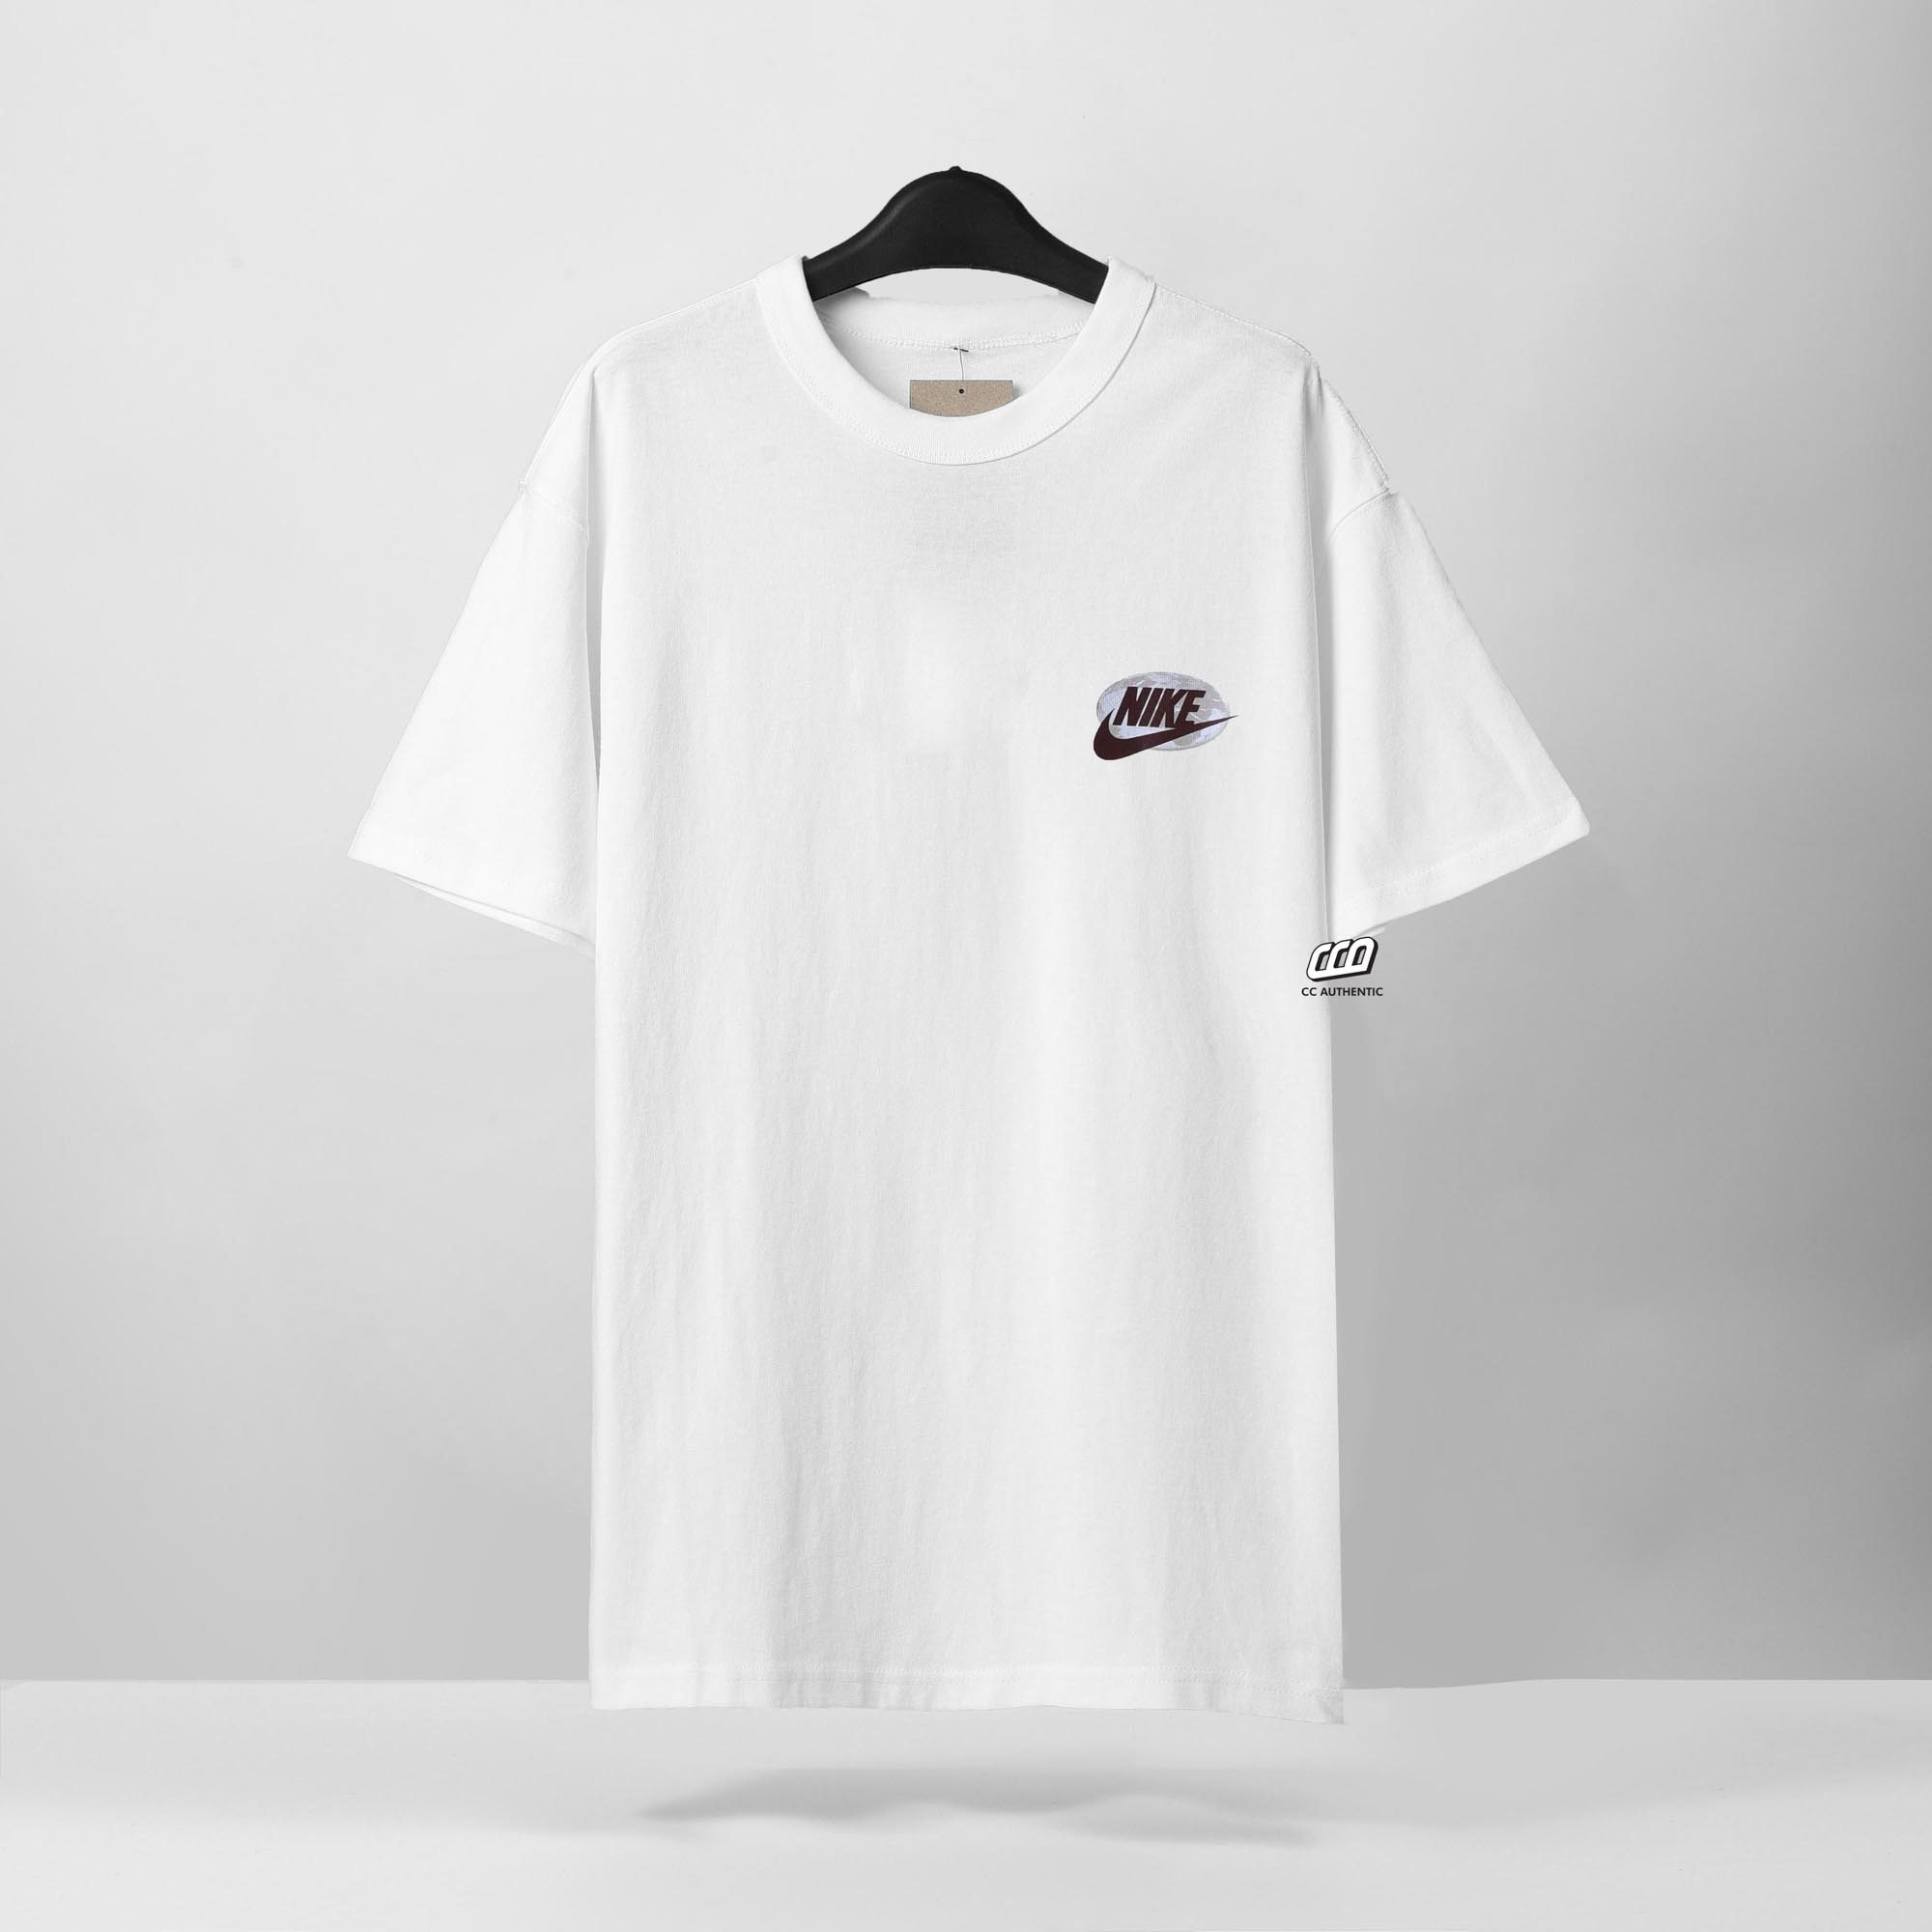 NIKE M90 BRING IT OUT HBR T-SHIRT - WHITE